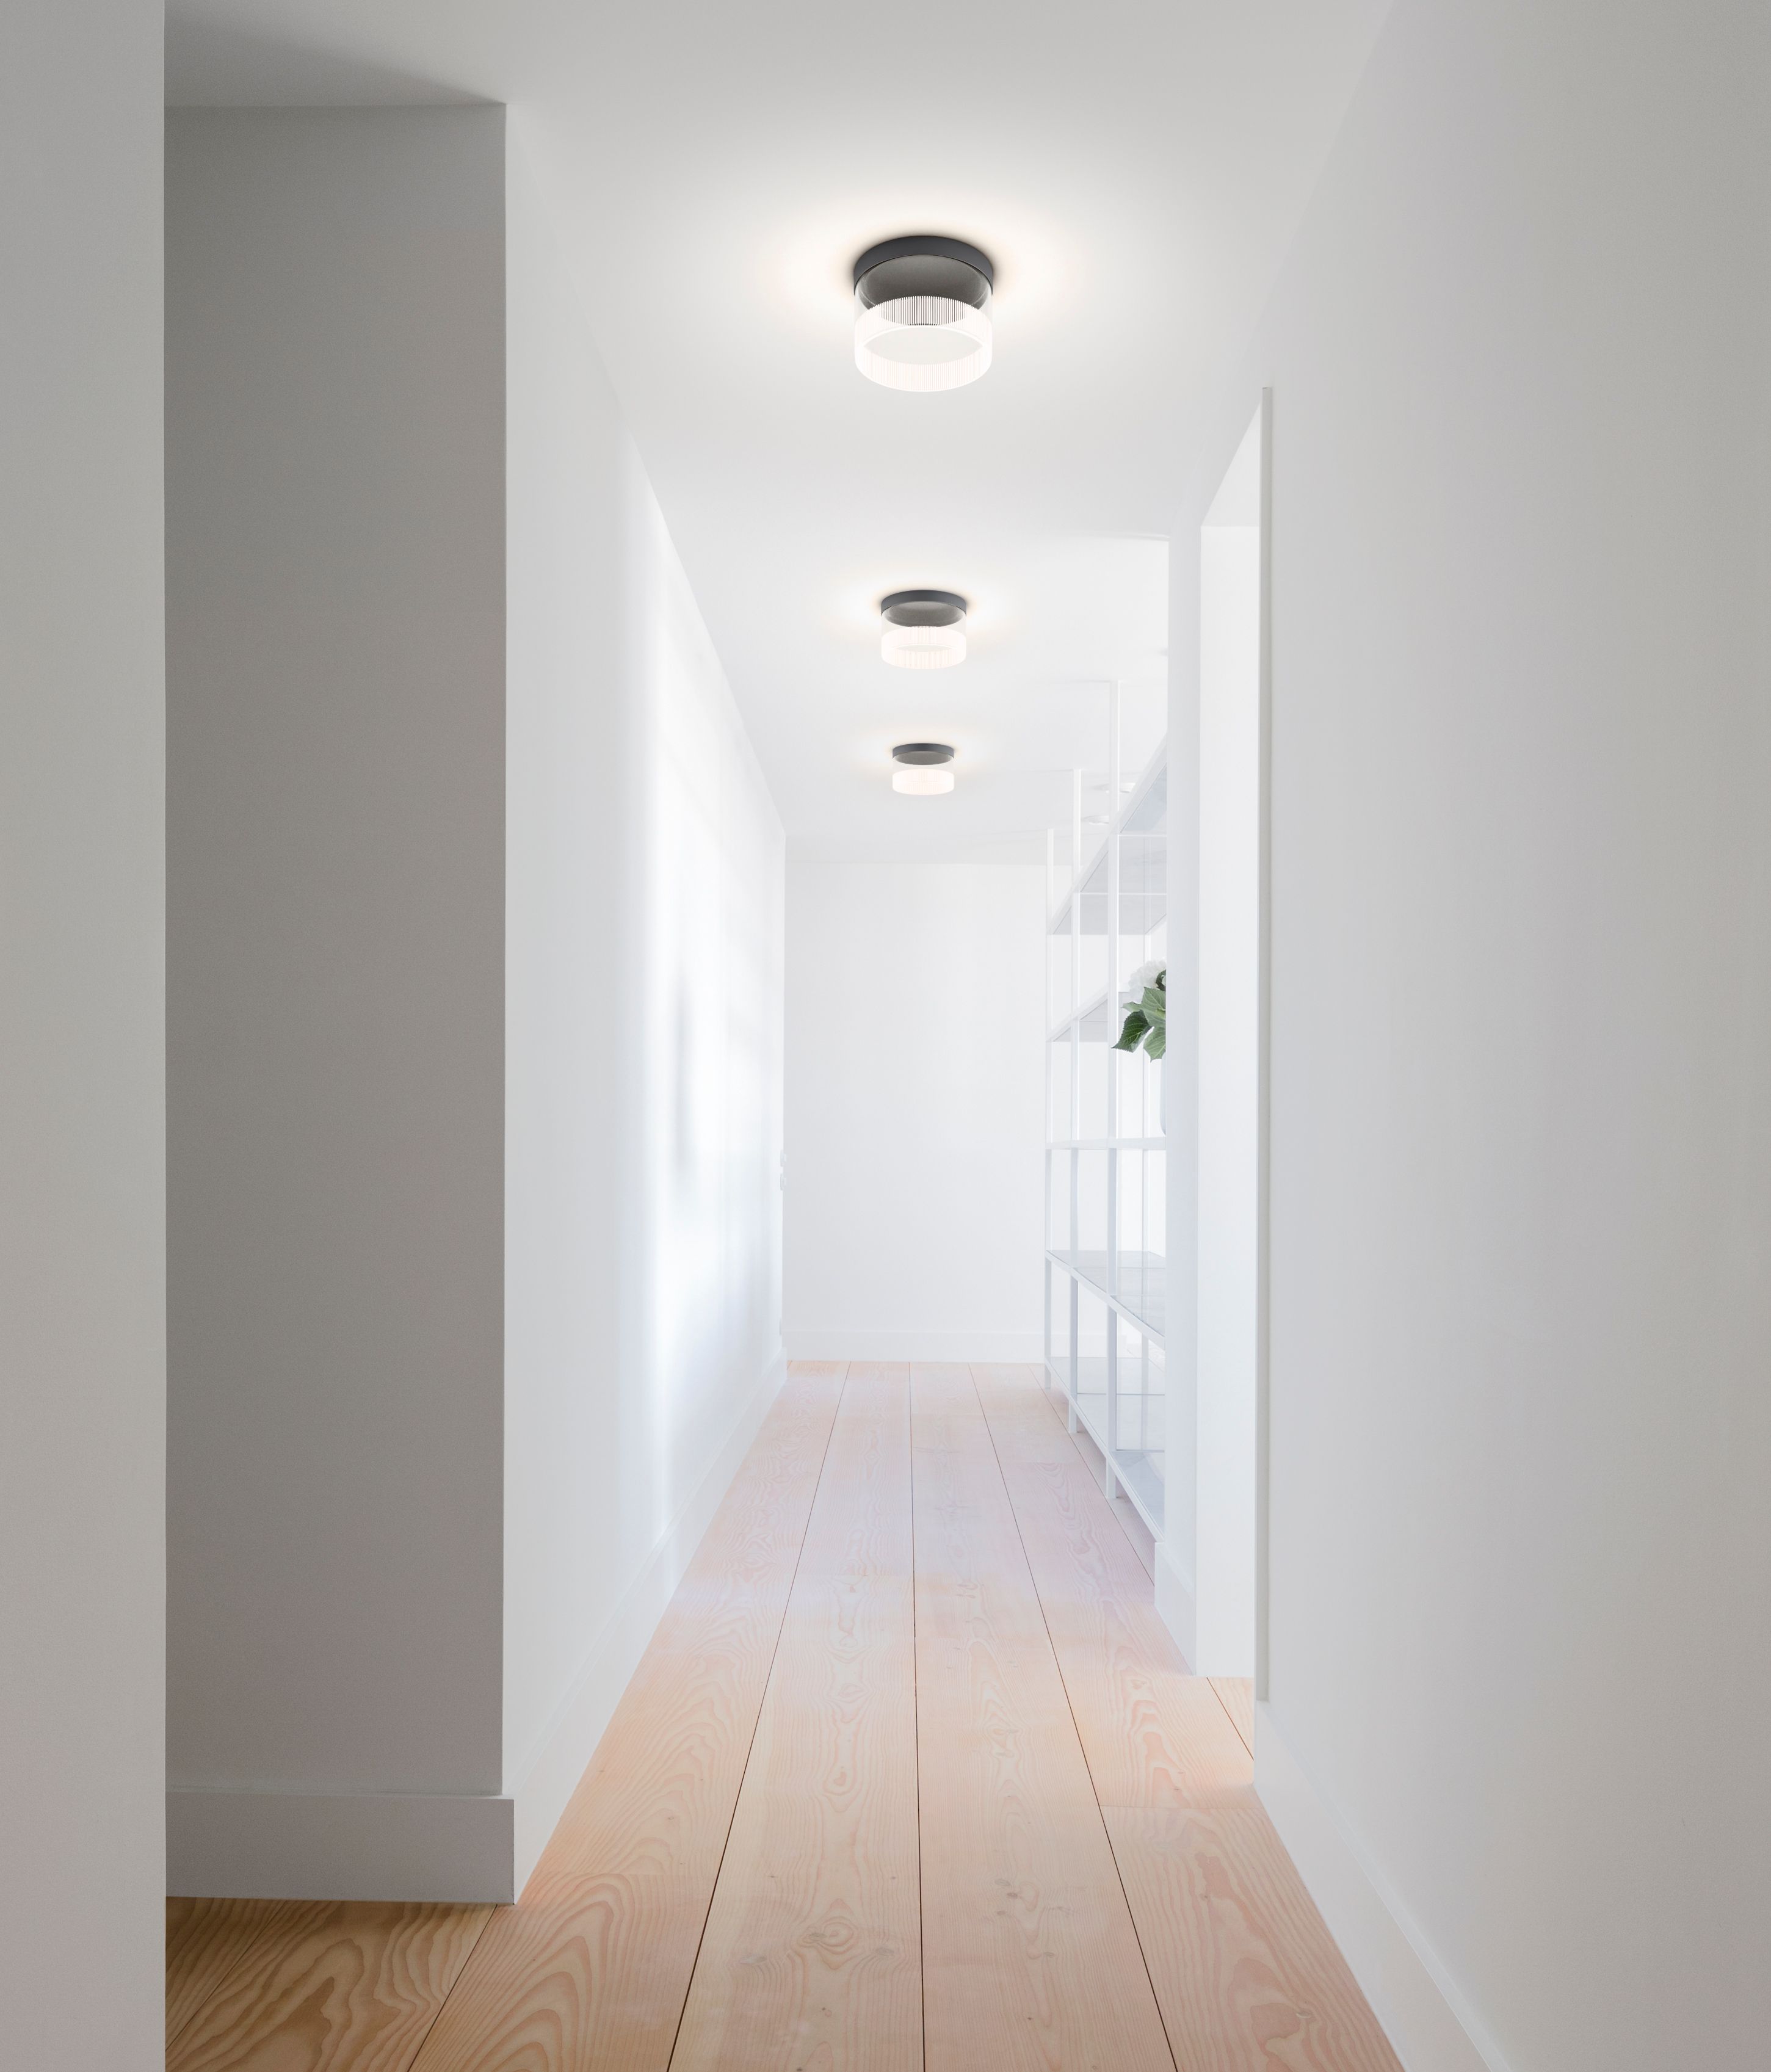 Overhead lamp Guess by Vibia